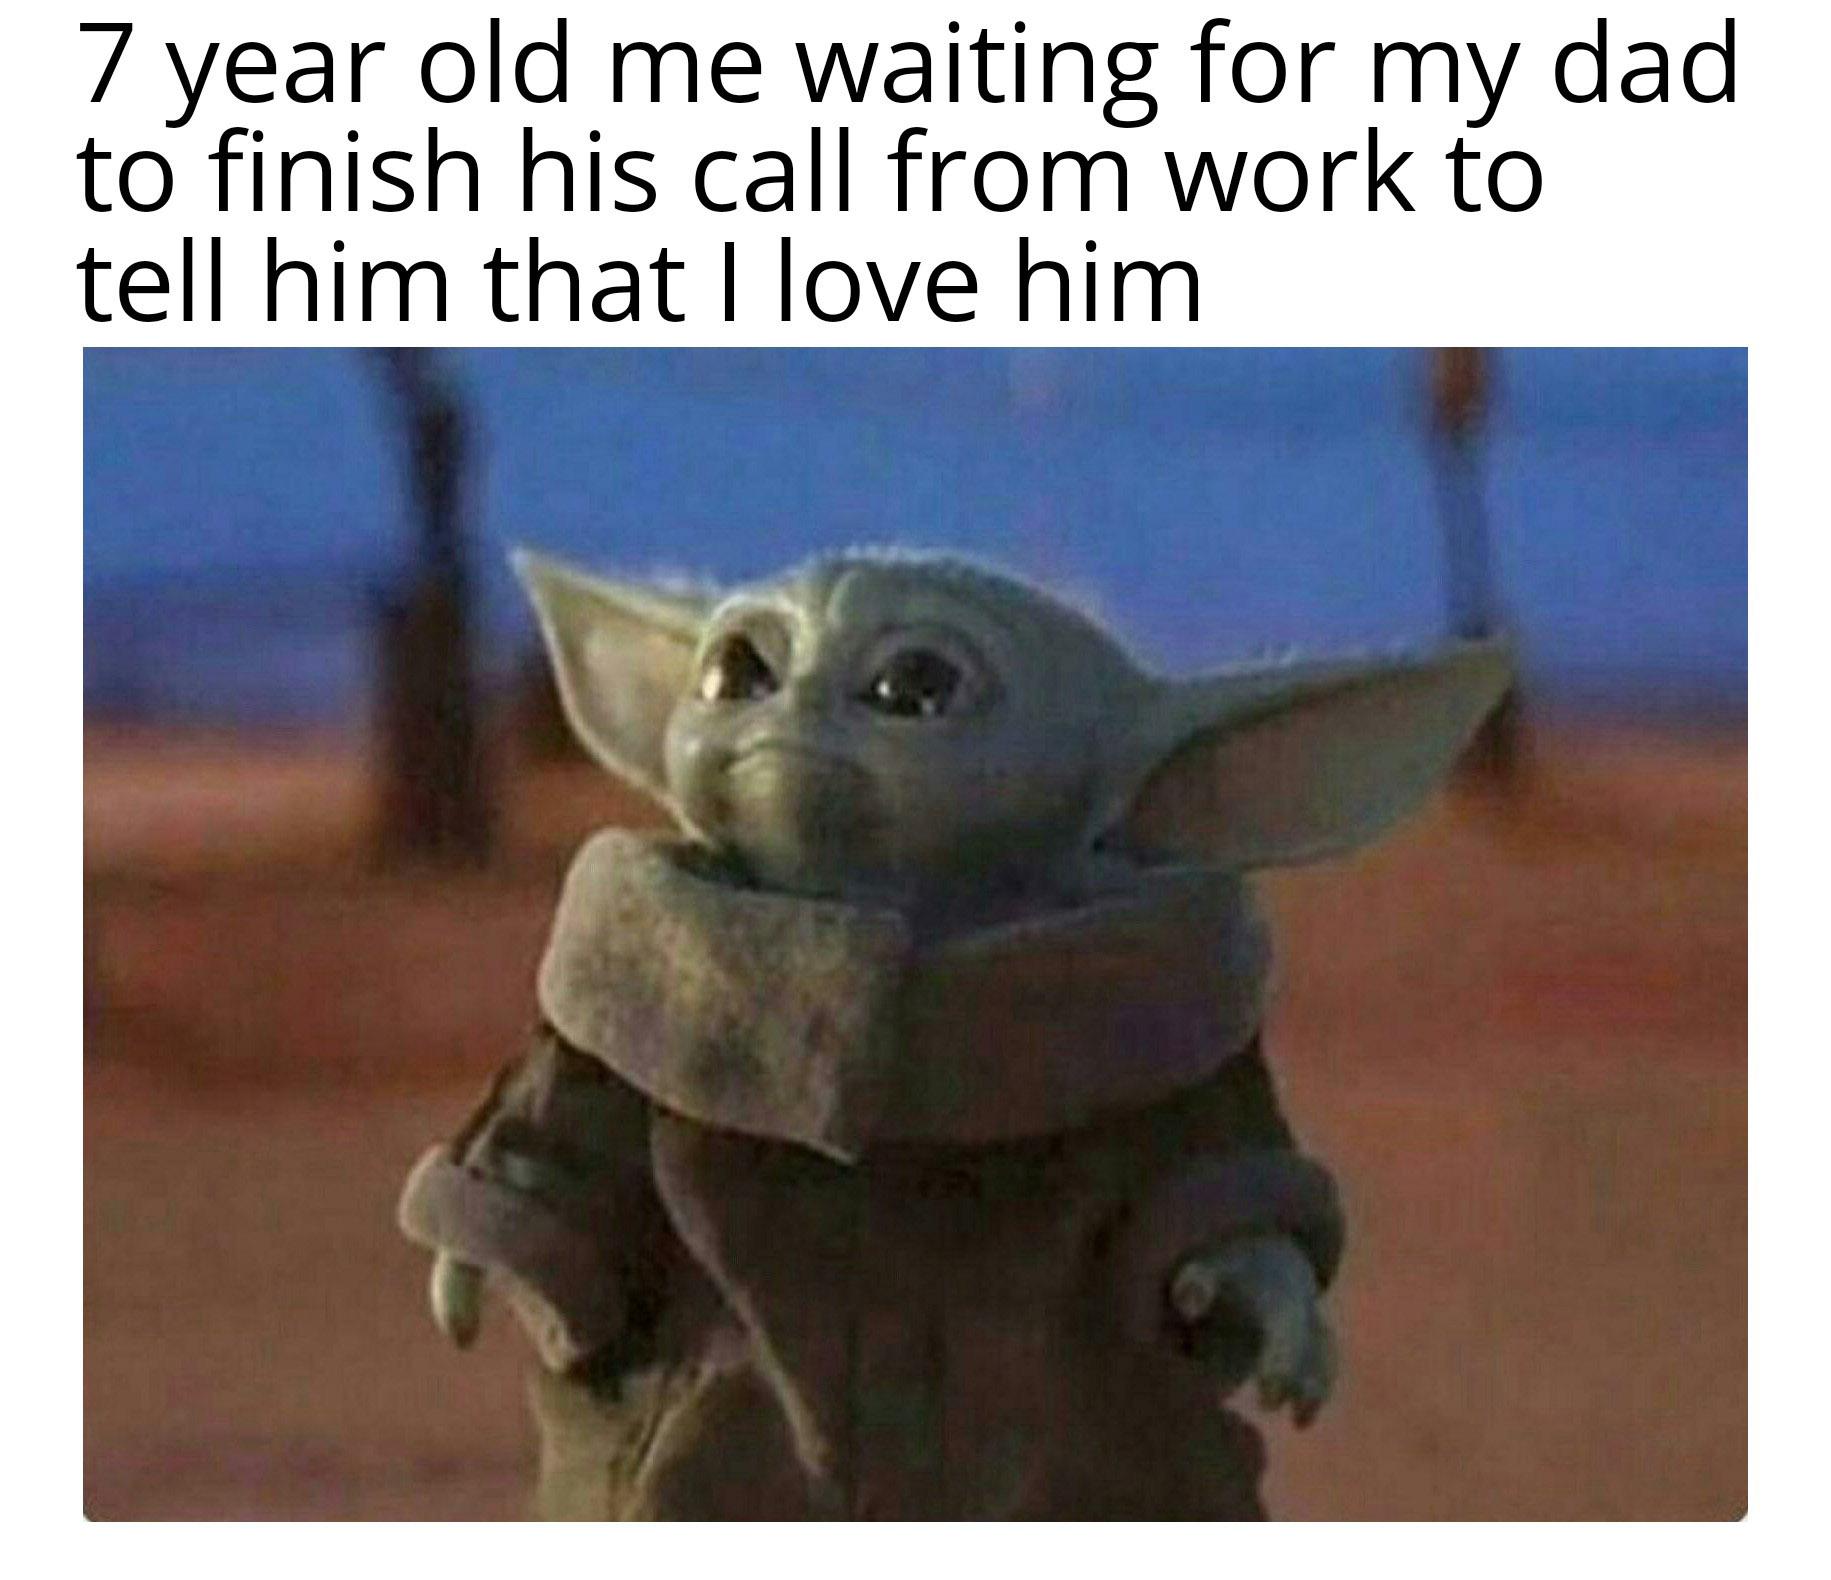 baby yoda meme - Baby for President - 7 year old me waiting for my dad to finish his call from work to tell him that I love him